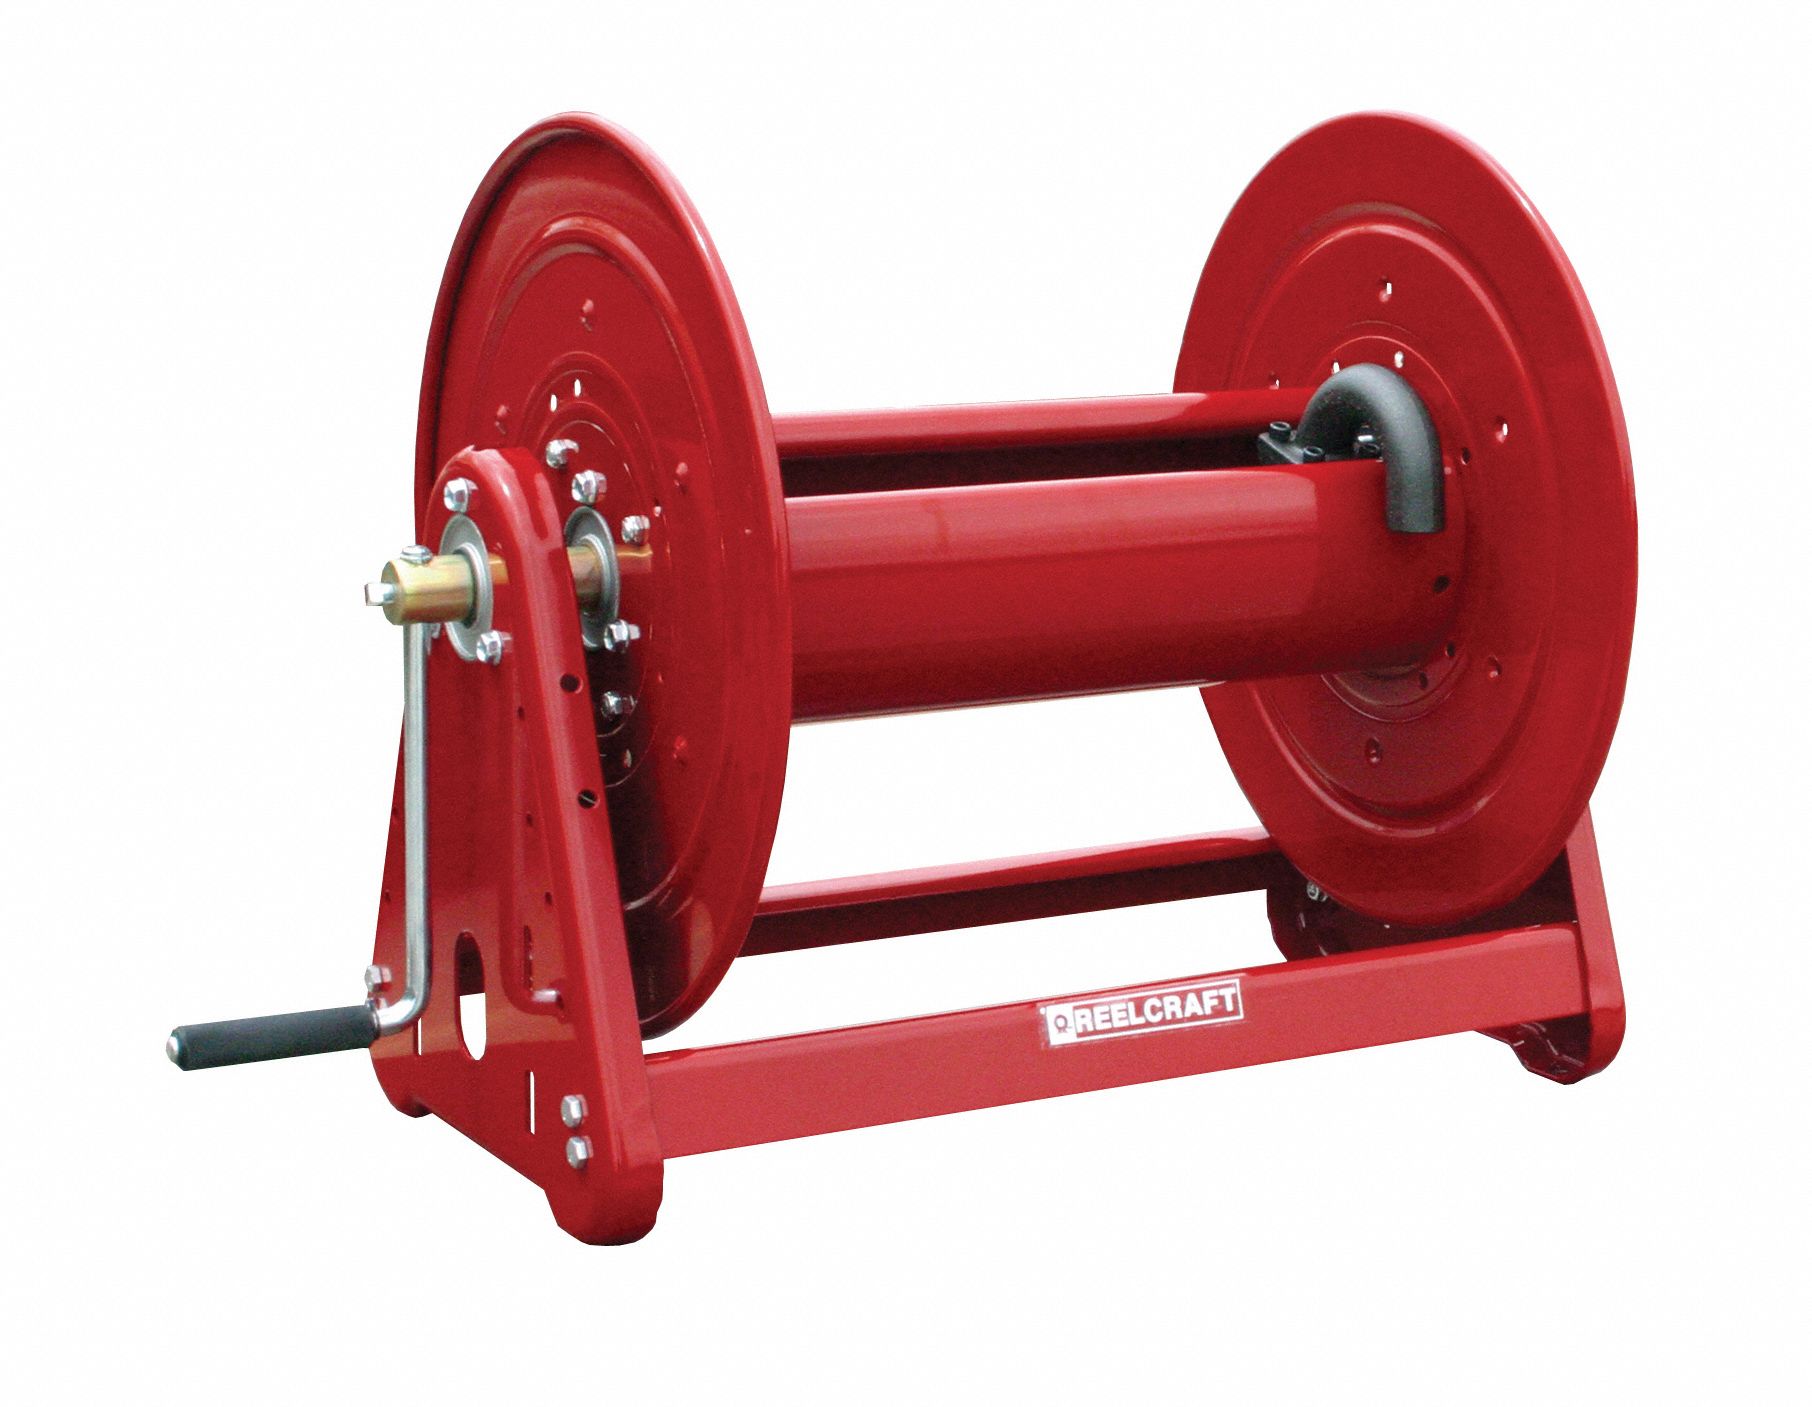 RED REEL, 20 1/4 IN LENGTH, 17 3/4 IN HEIGHT, 1000 PSI, DUCTILE IRON, POWDER COATED